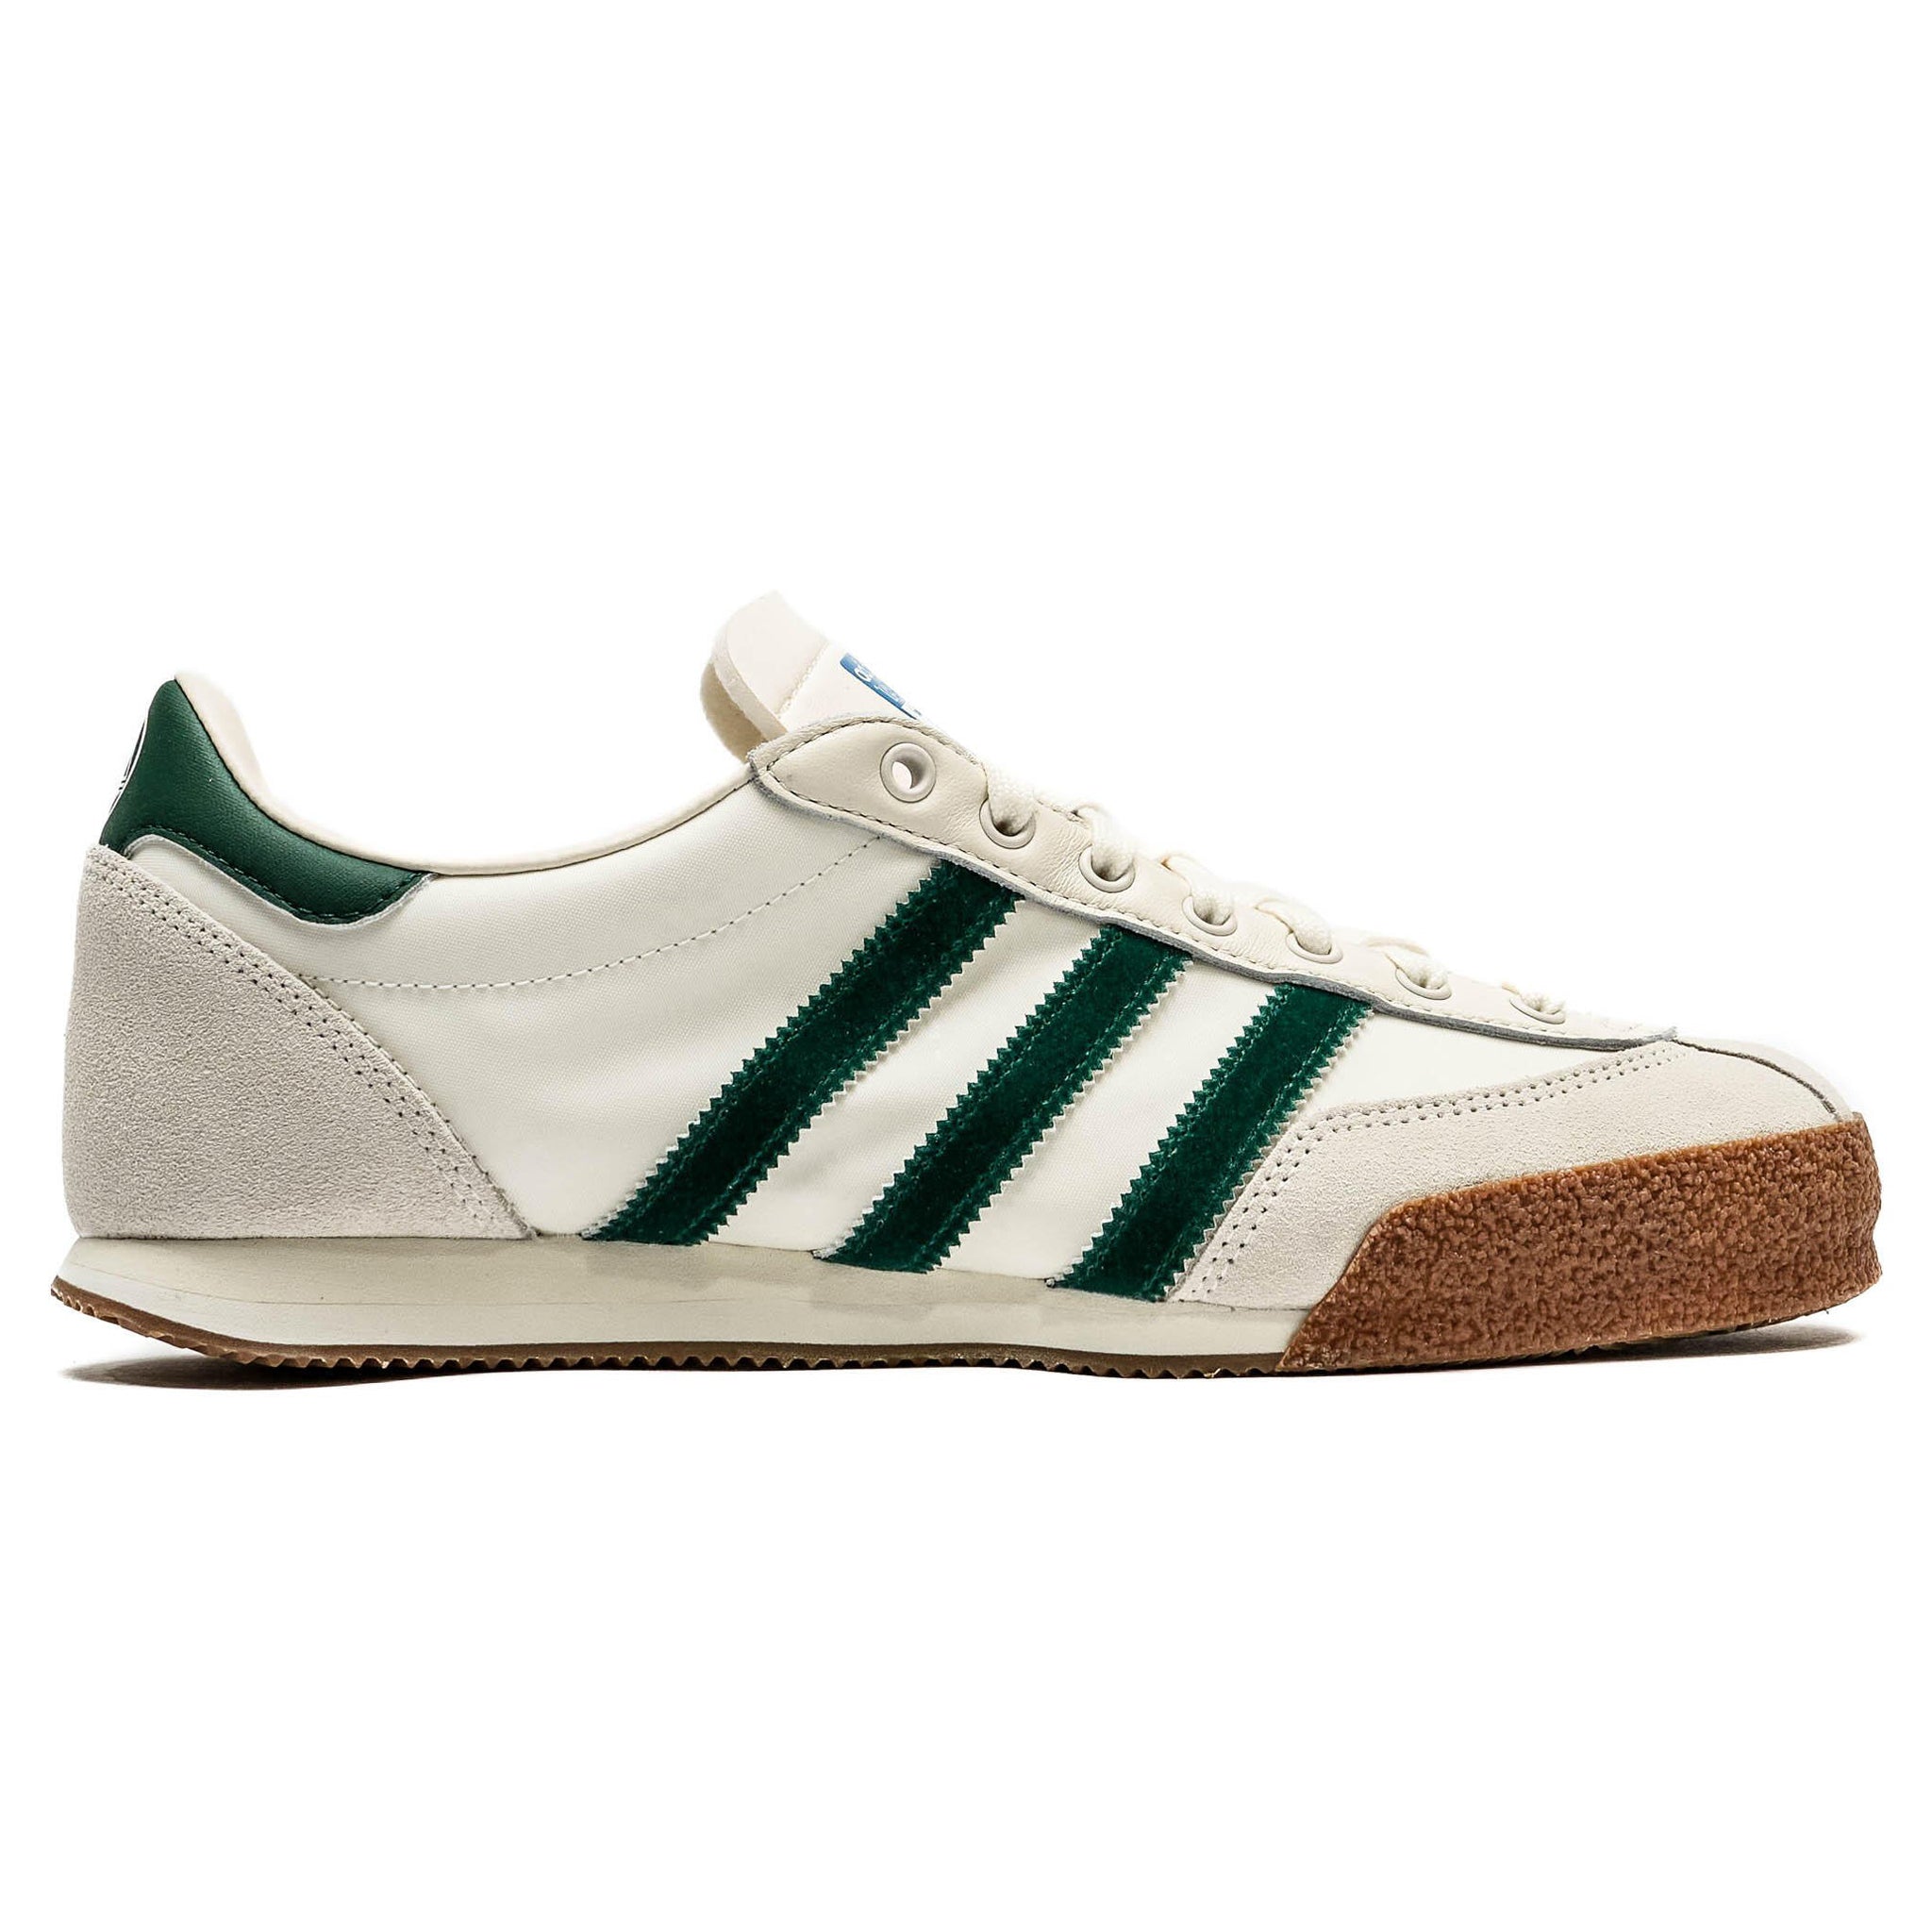 Side View of Liam Gallagher x Adidas Spezial LG2 Bottle Green IF8358